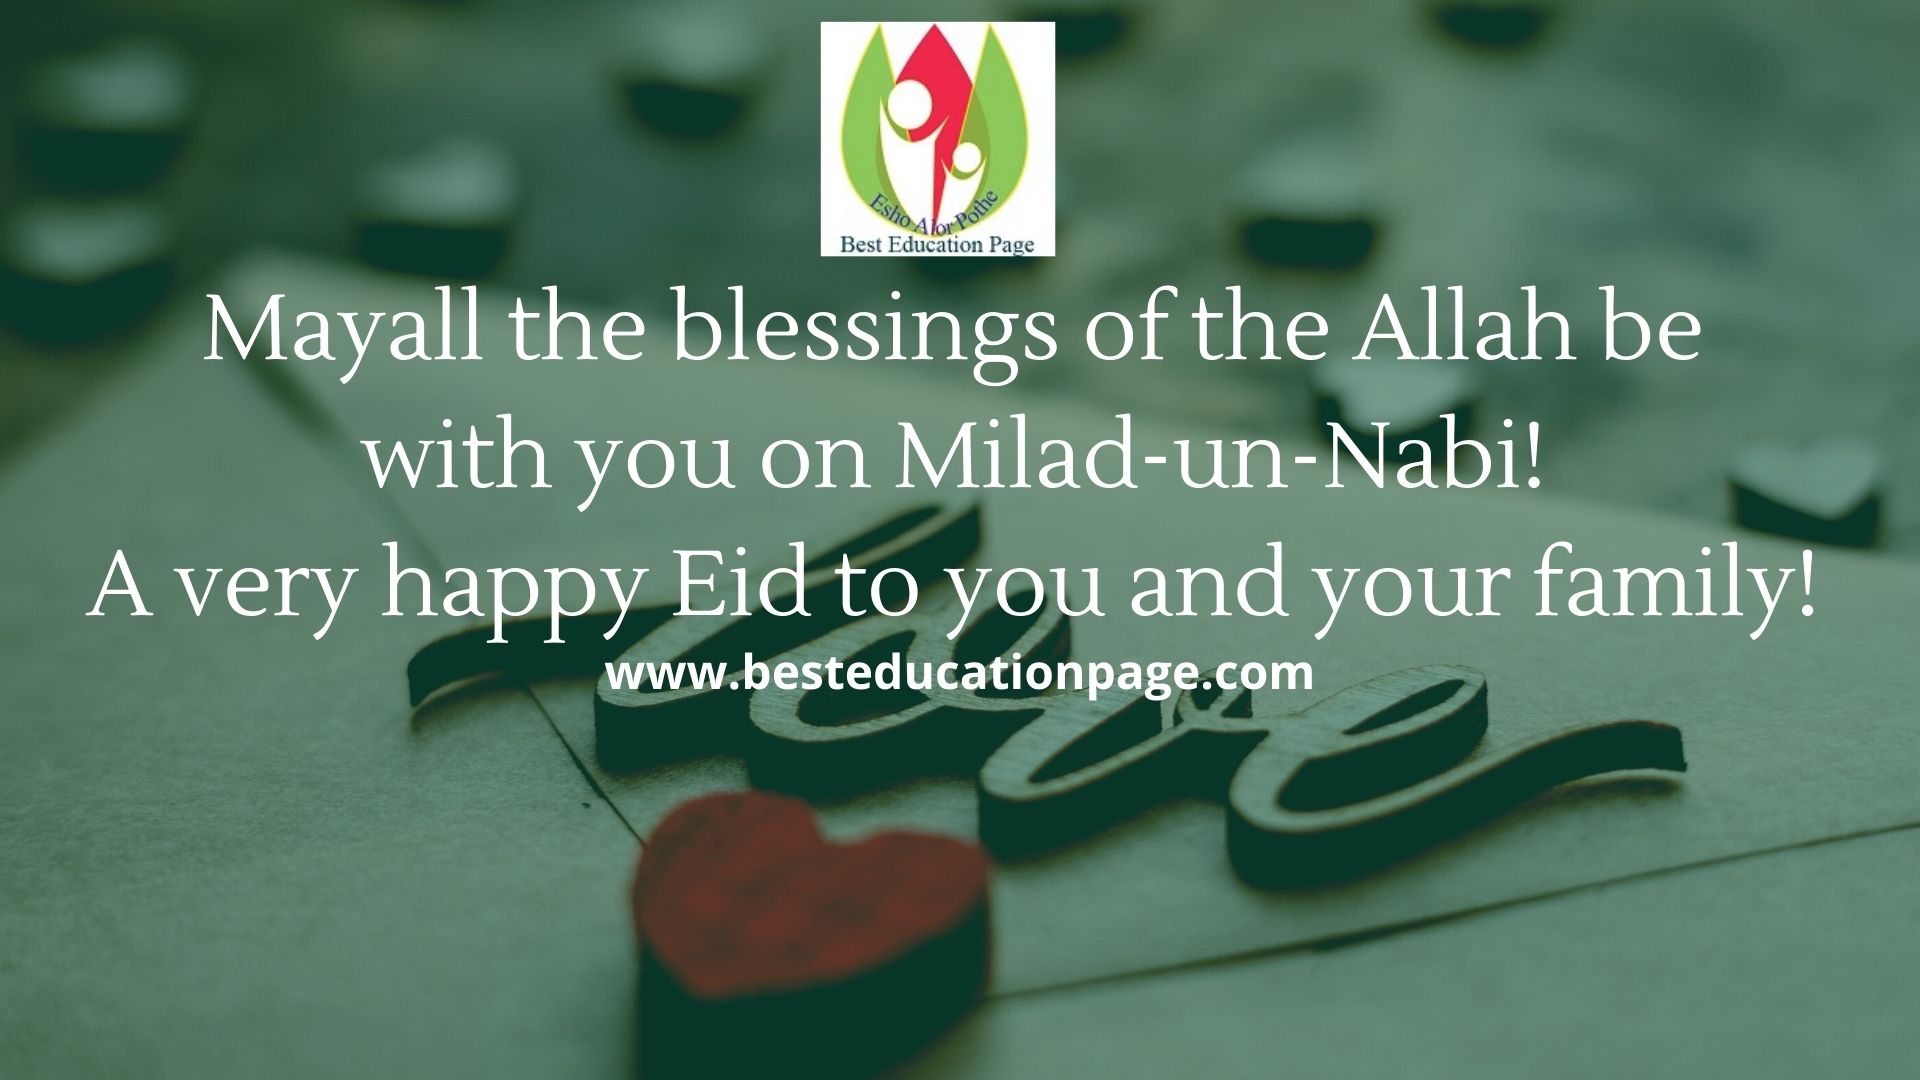 May all the blessings of the Allah  be with you on Milad-un-Nabi! A very happy Eid to you and your family!